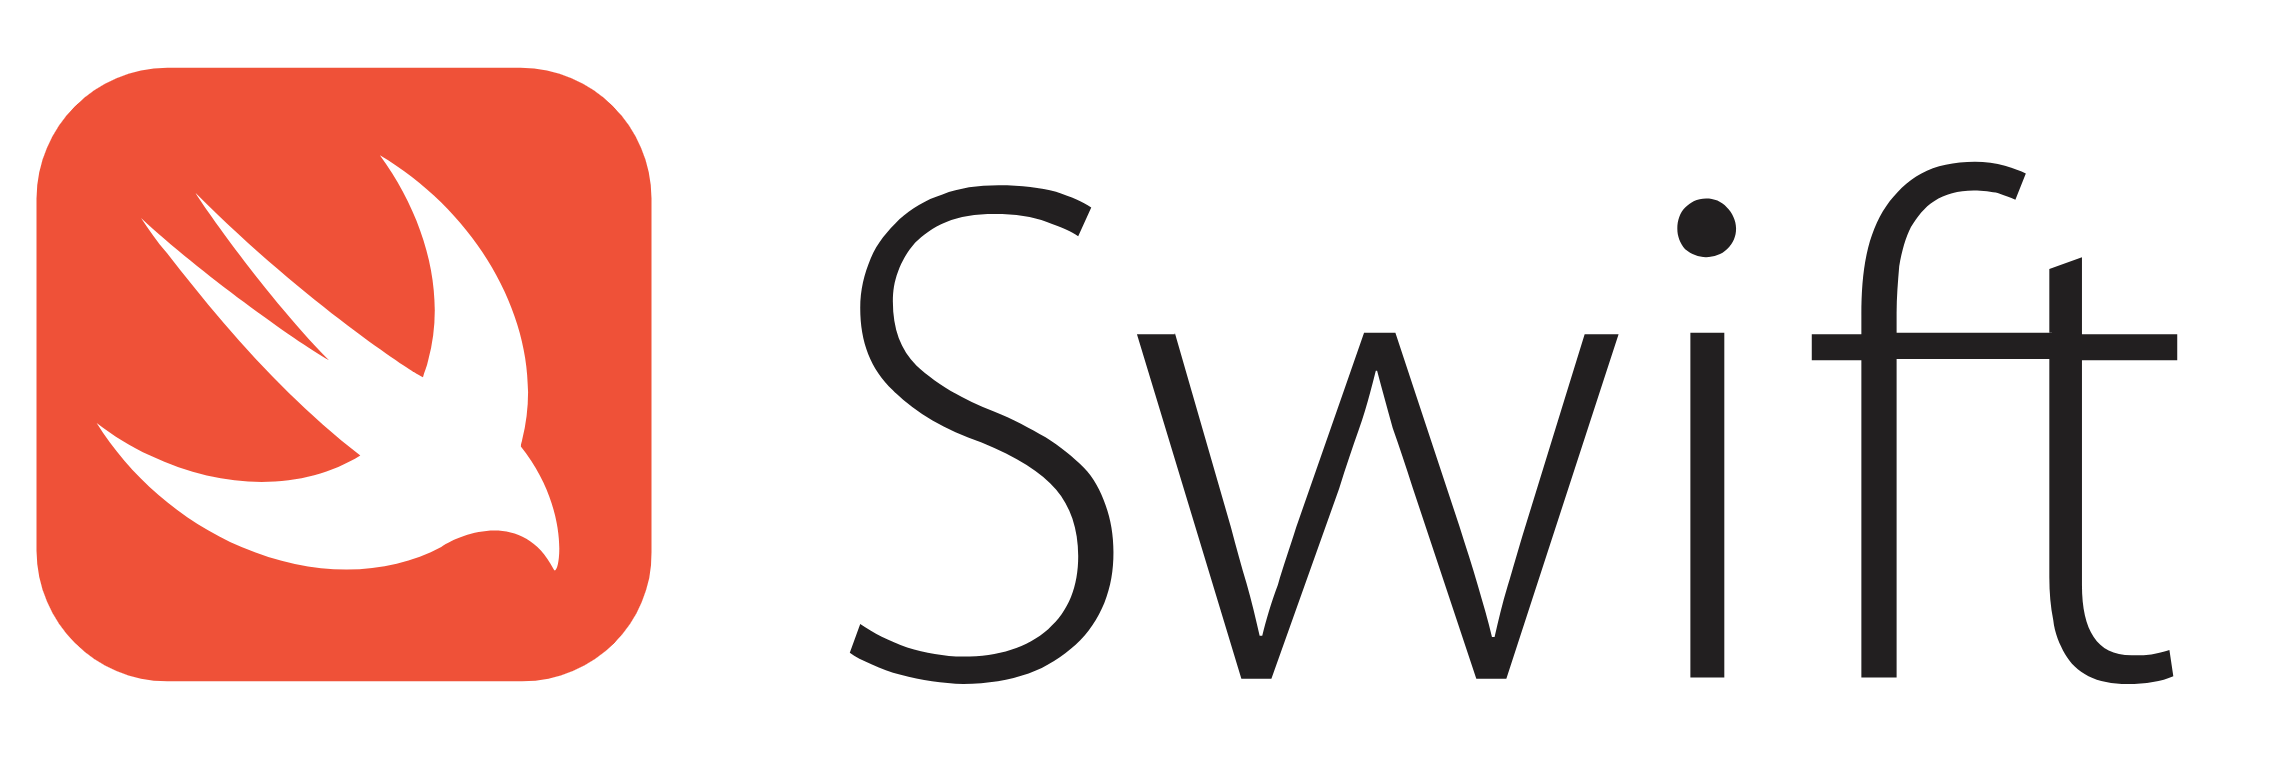 Swift Logo - Swift / official or unofficial logo · Issue #77 · exercism/meta · GitHub